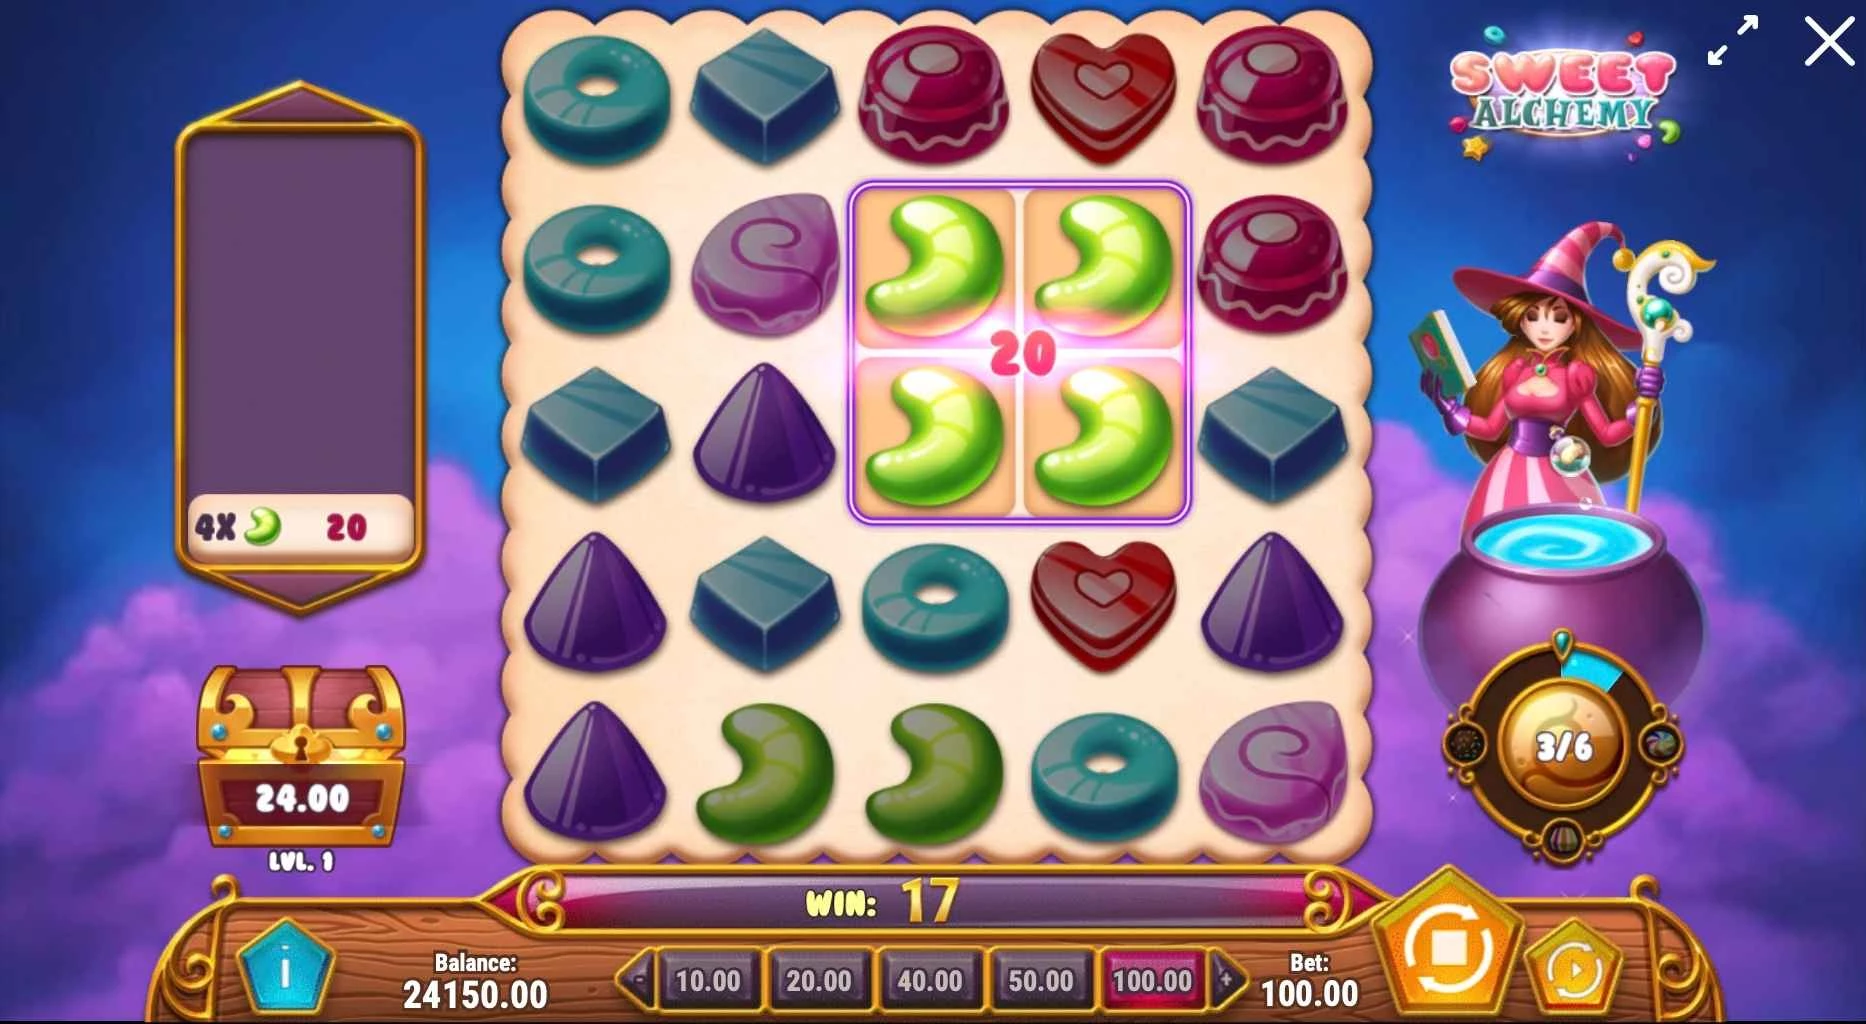 Sweet Alchemy Slot by Play'n Go - Bets